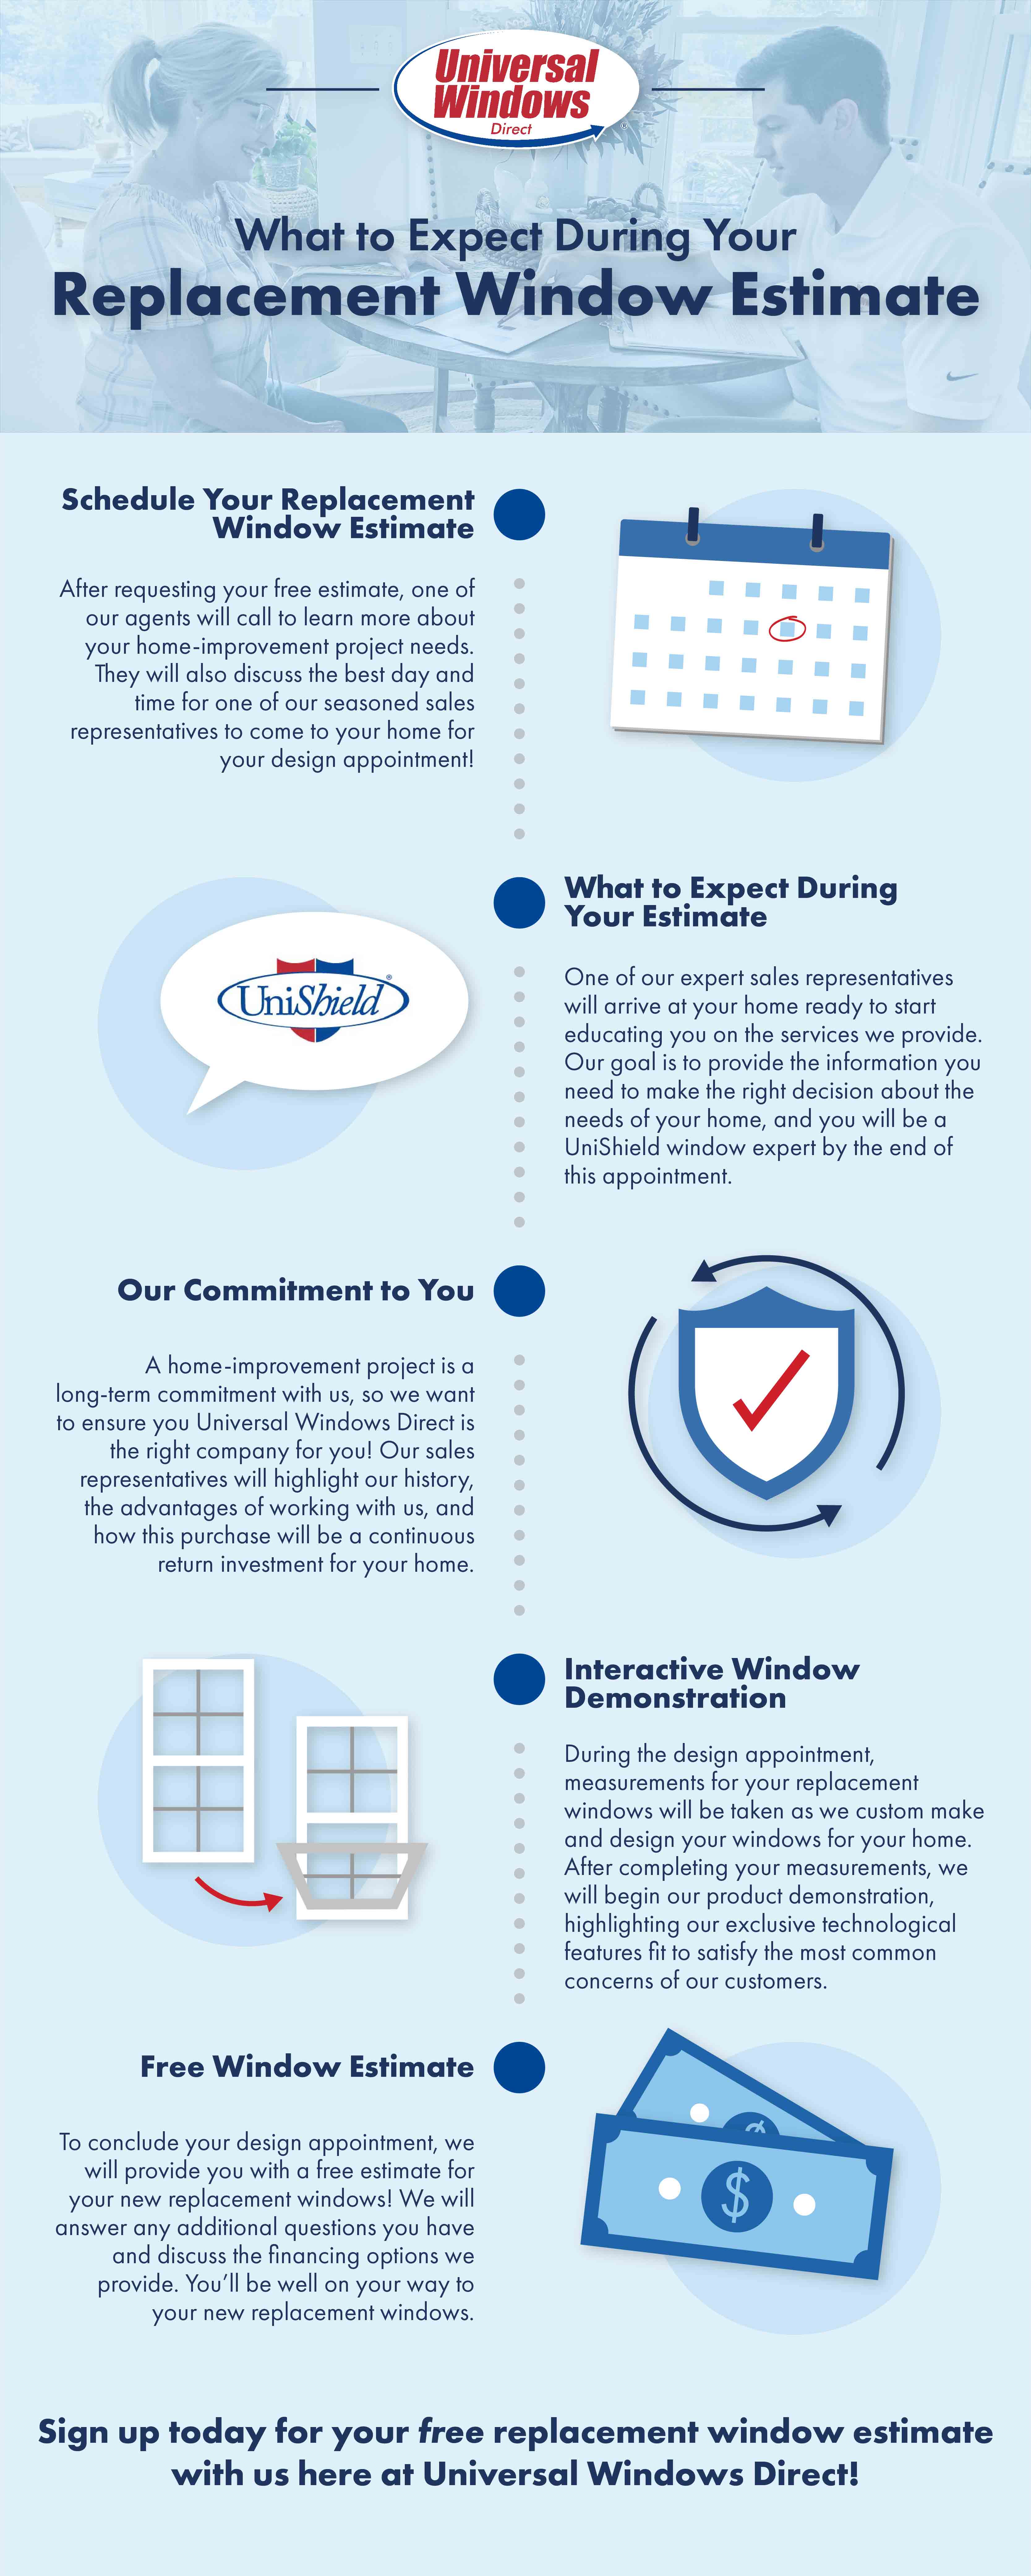 Learn more about getting a replacement window estimate with this infographic